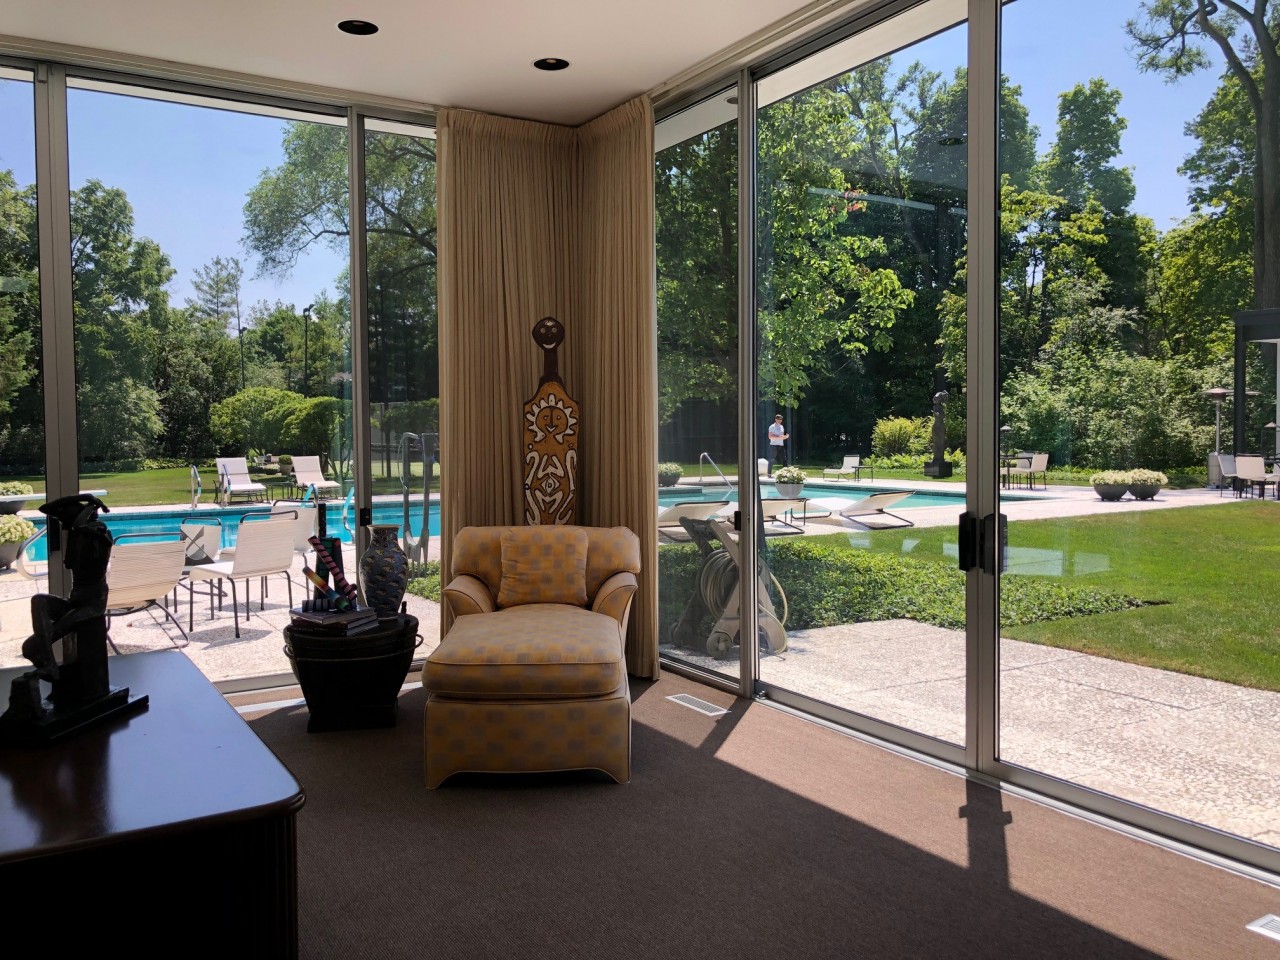 Incredible, iconic steel & glass MCM home designed by Tony Grunsfeld in Northfield, IL